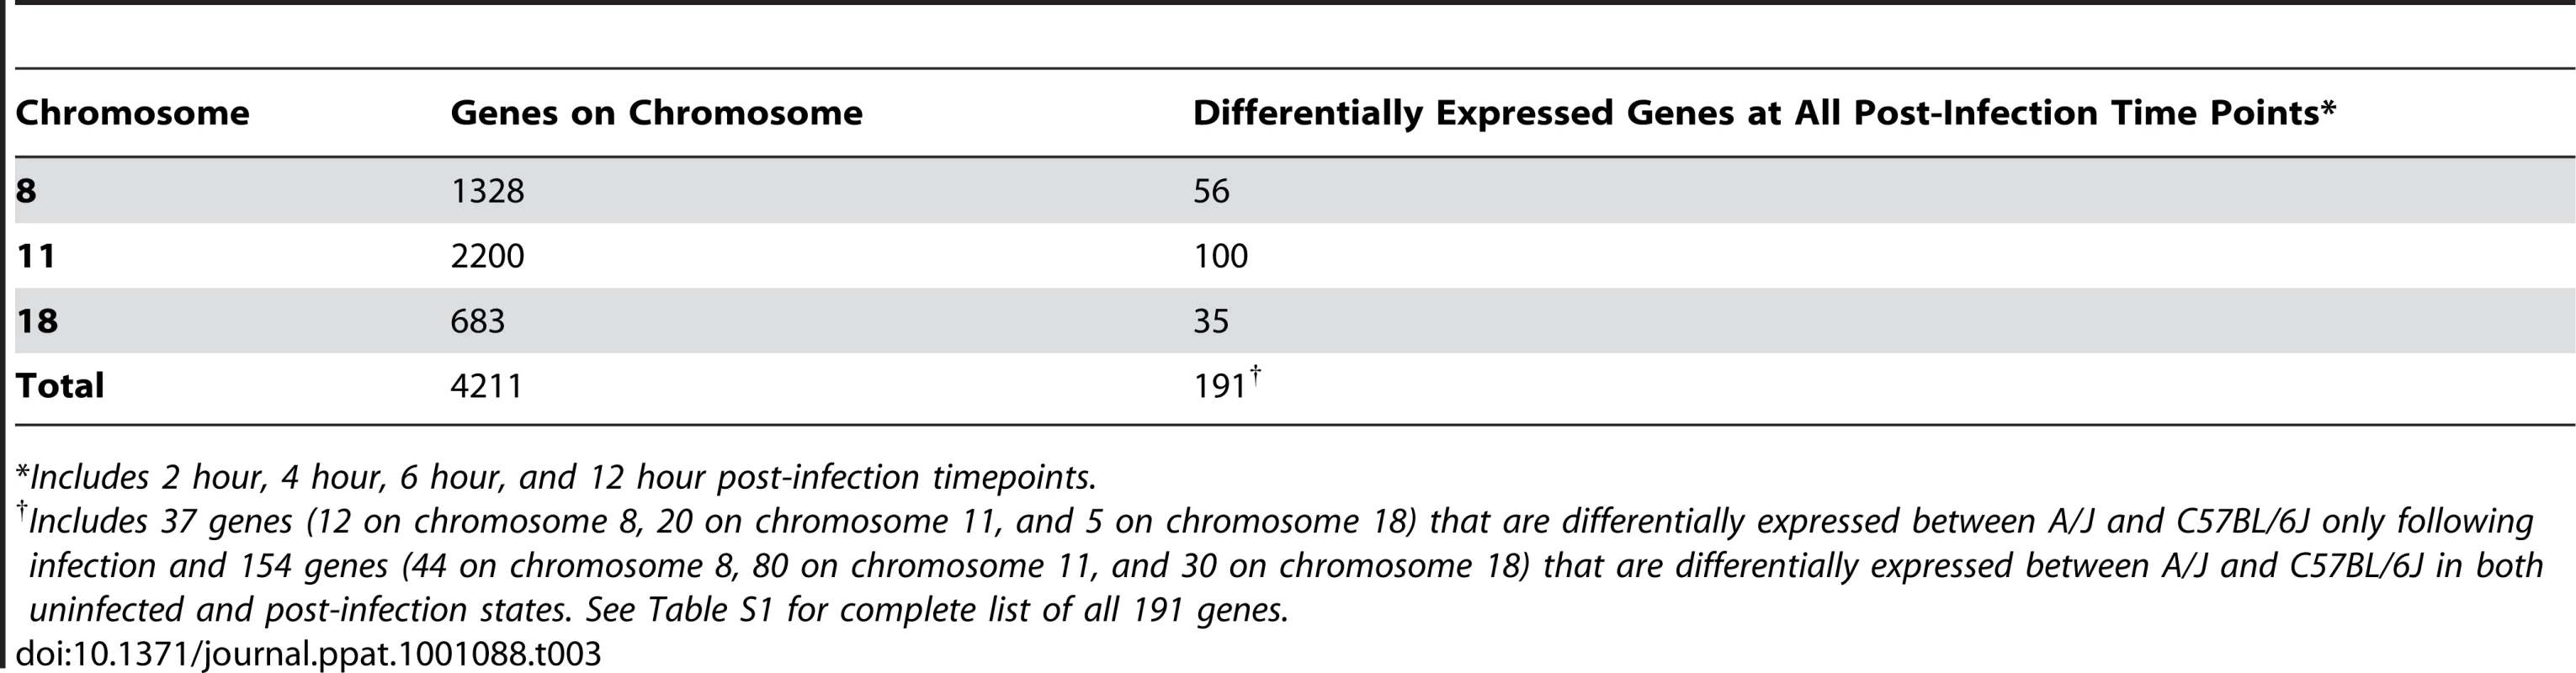 Number of genes on murine chromosomes 8, 11, and 18 that are differentially expressed between A/J and C57BL/6J at all post-infection timepoints following intraperitoneal infection with <i>S. aureus</i>.